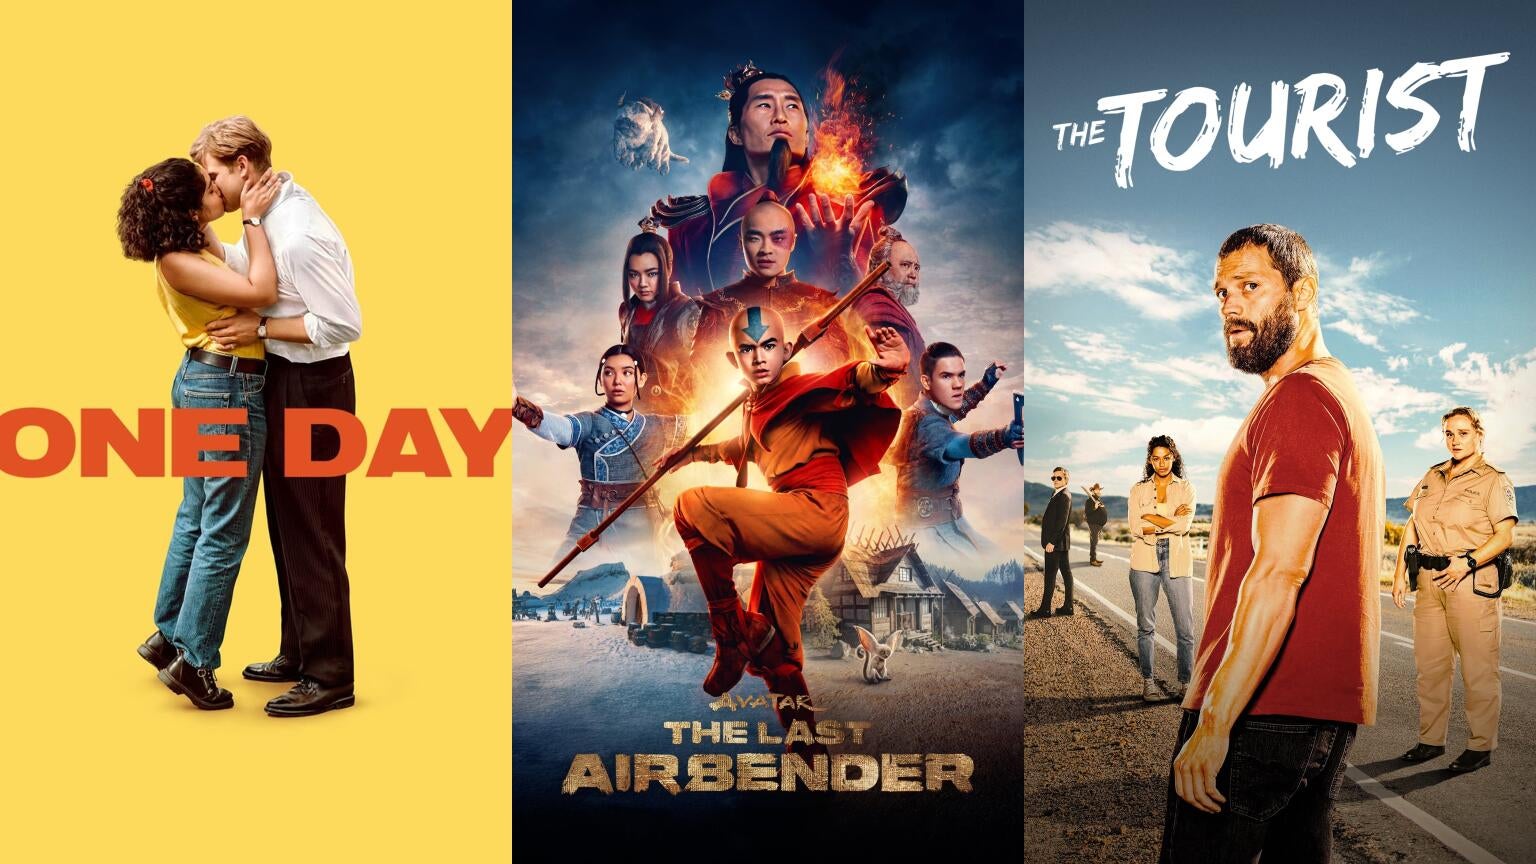 Posters for Netflix's "One Day, "Avatar: The Last Airbender," and "The Tourist"